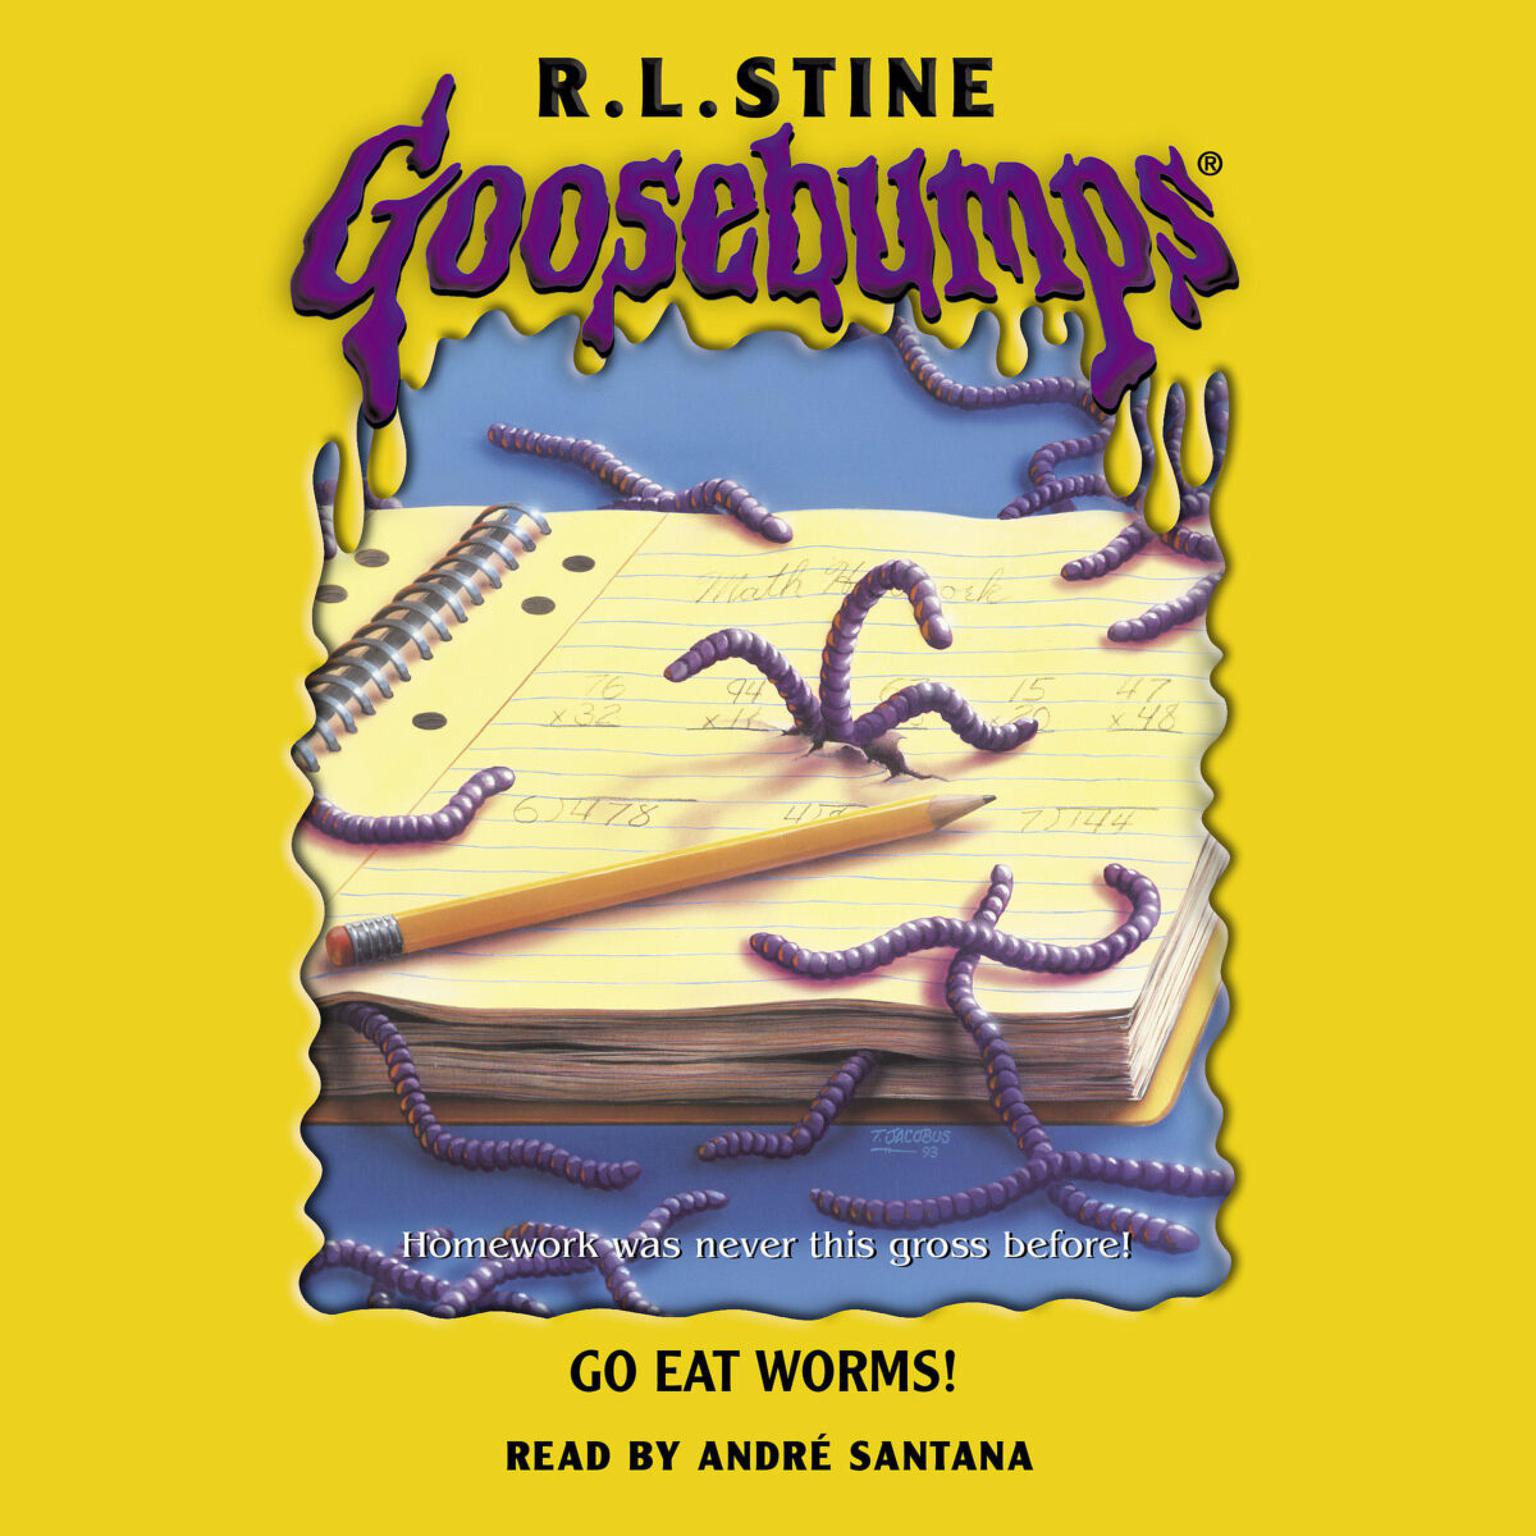 Go Eat Worms! (Goosebumps #21) Audiobook, by R. L. Stine